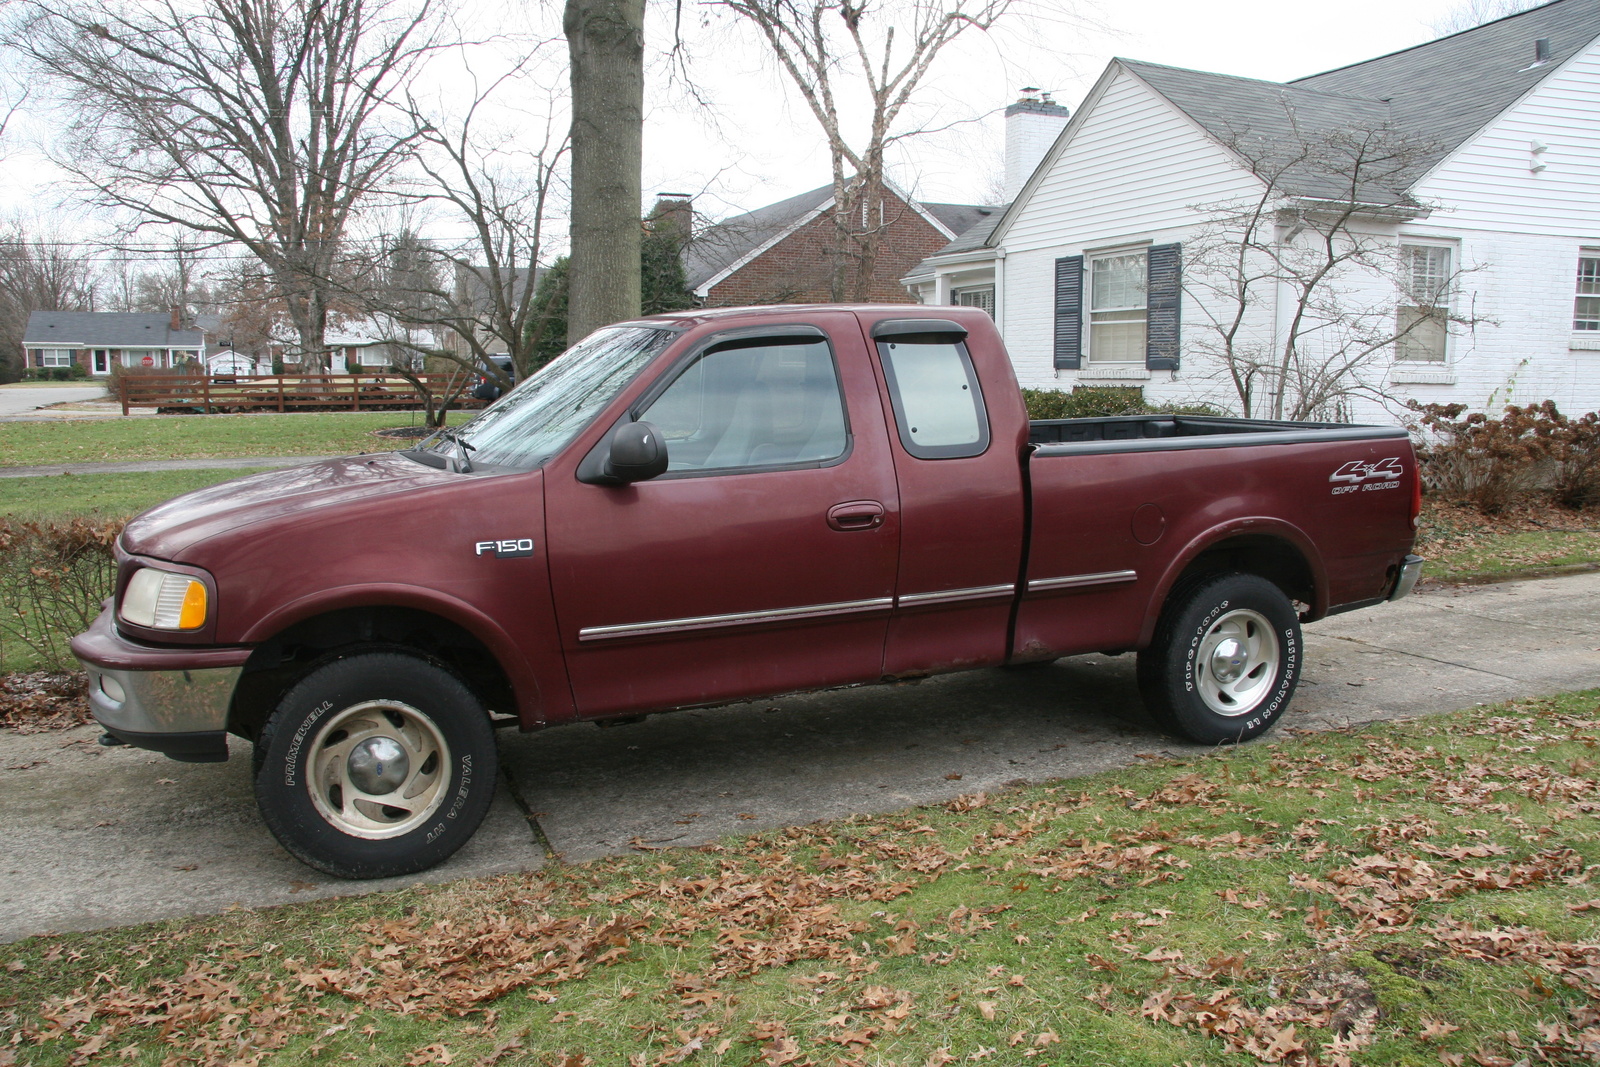 1997 Ford f150 extended cab review #2